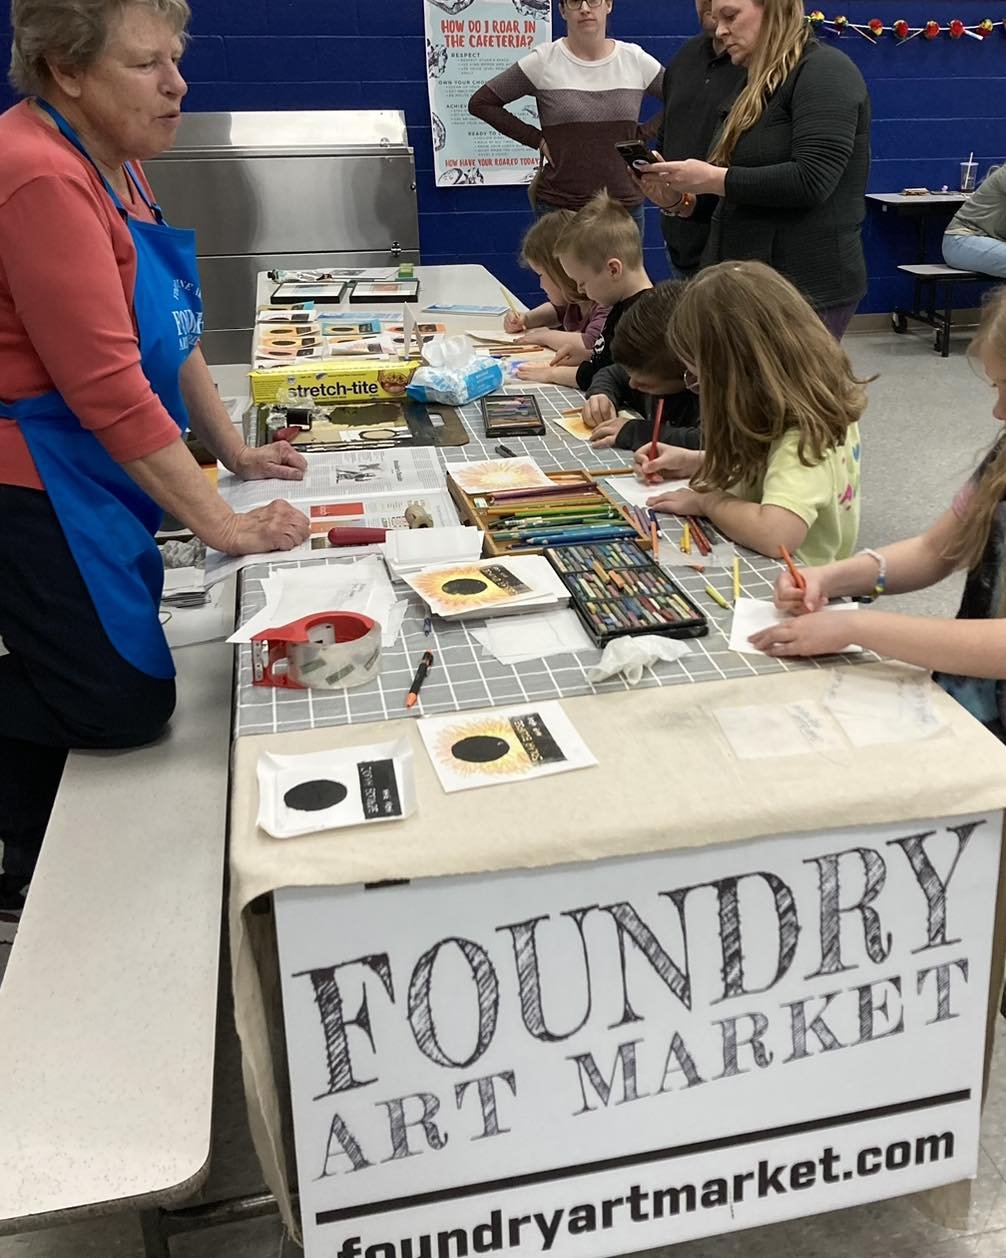 Representing the Foundry Art Market last night, Anne Finucane provided a hands-on art project for Guilford Hills Elementary School&rsquo;s Art Night.  #franklincountypa #ceramics #acrylicpaintings #finditatthefoundry #foundryartmarket #chambersburgpa